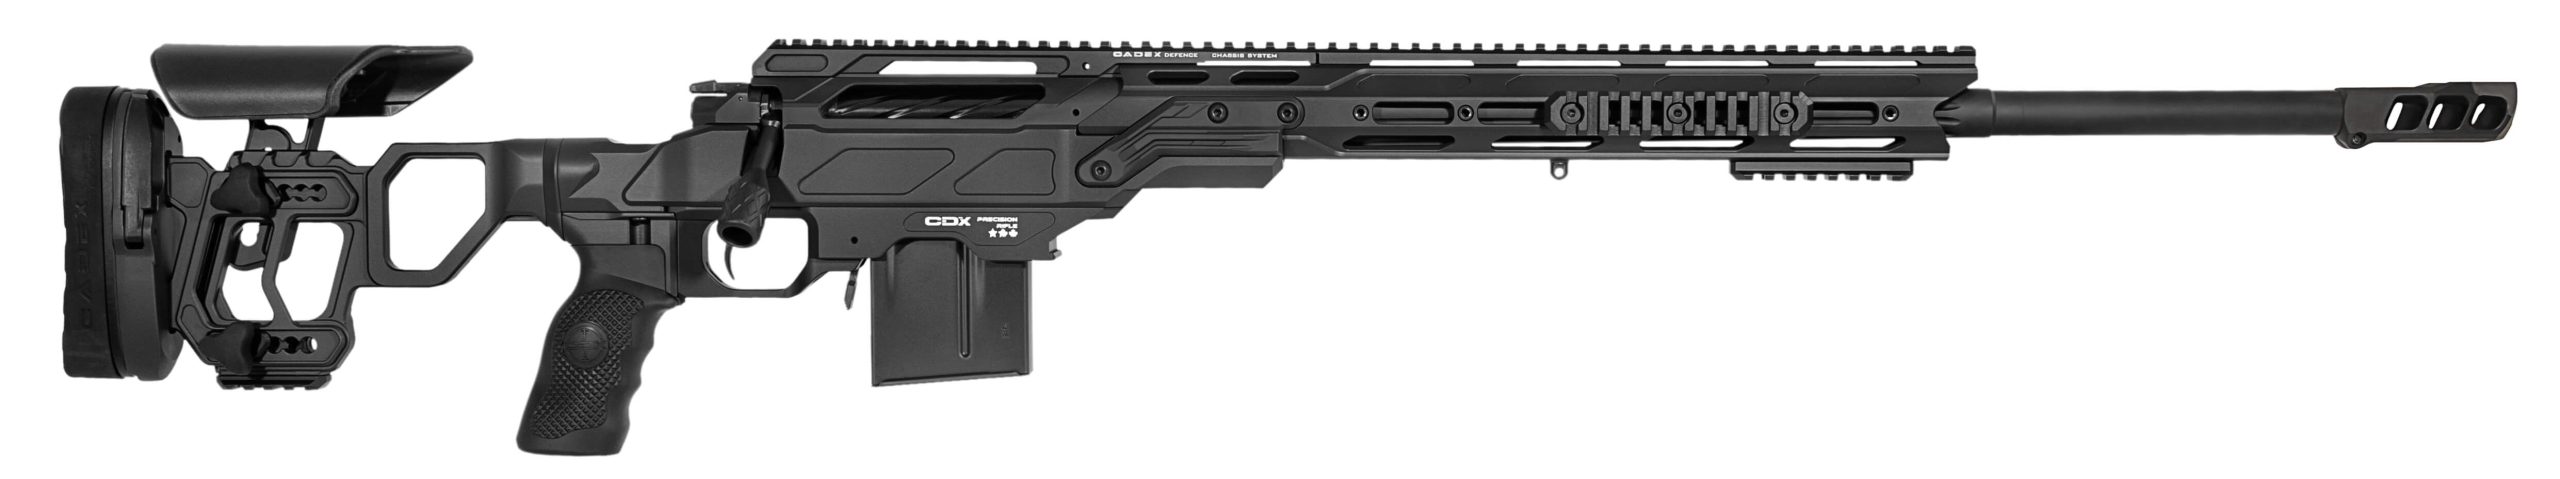 CDX TAC BLK scaled